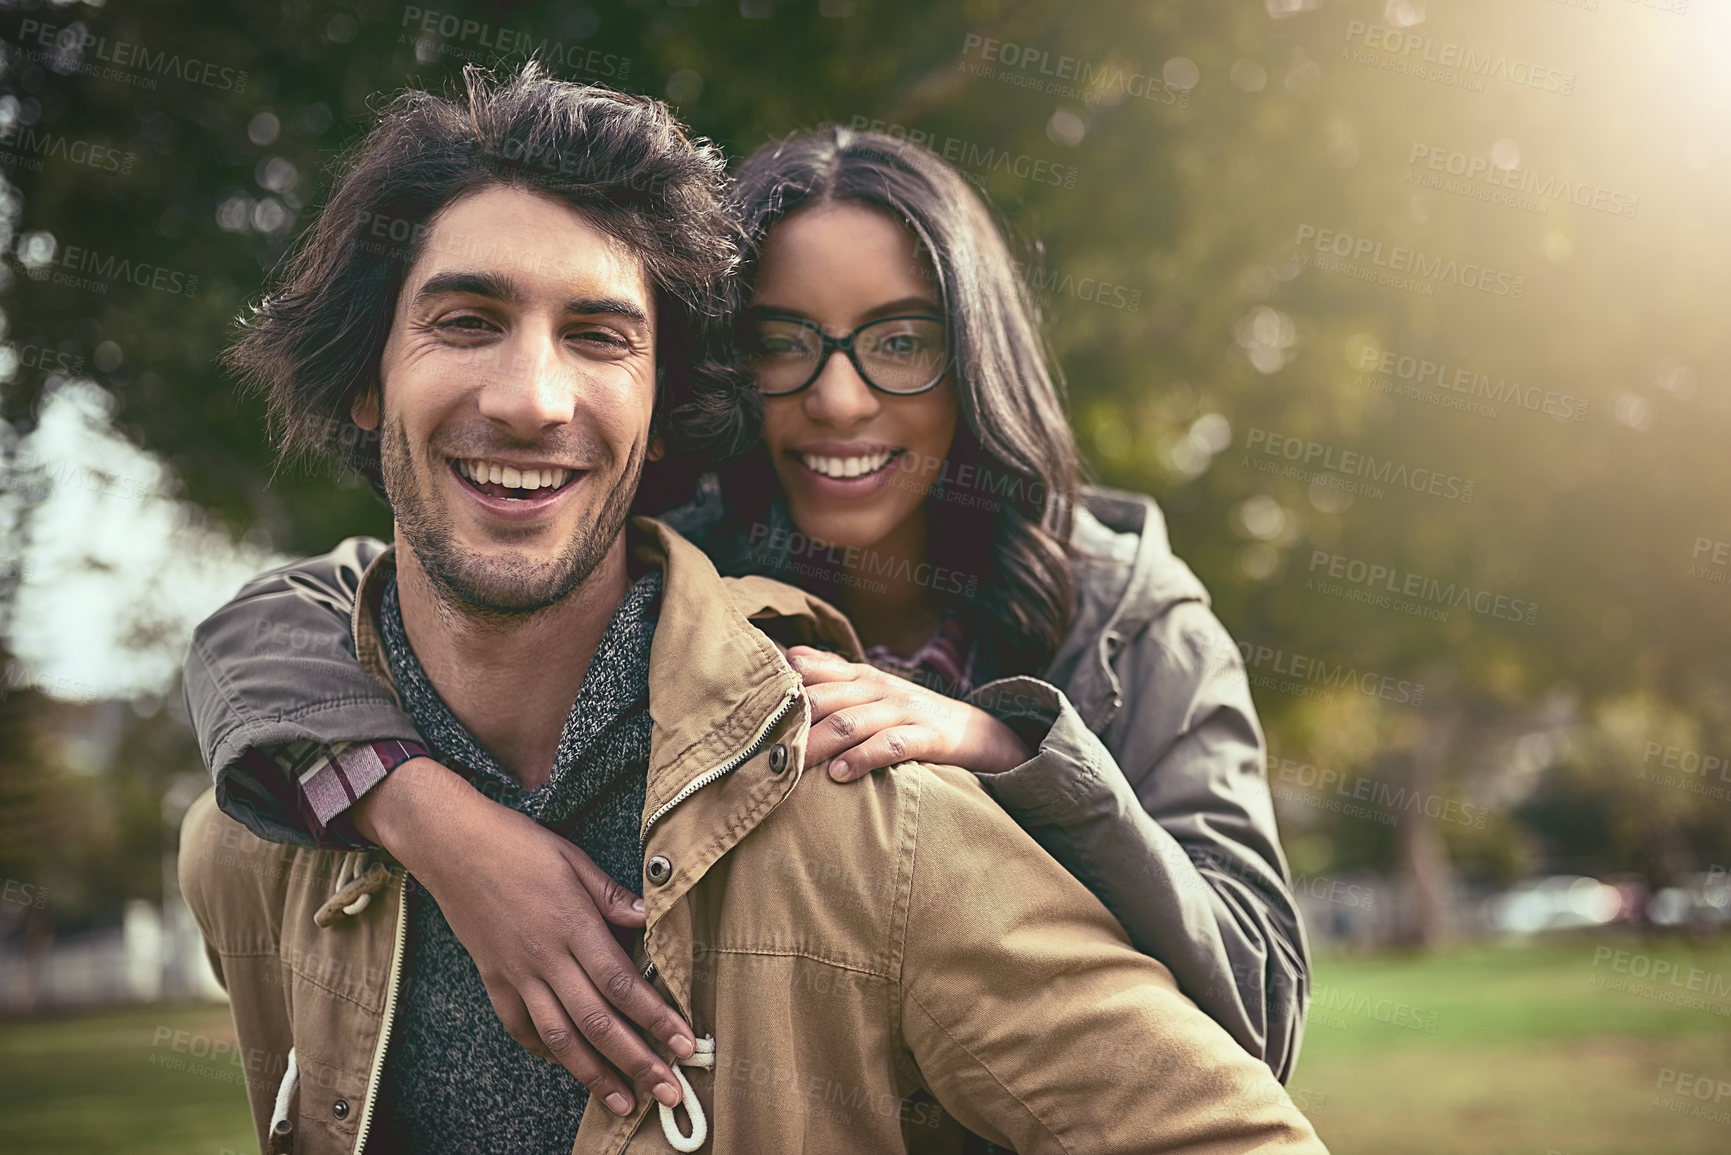 Buy stock photo Portrait of a cheerful young couple having a piggyback ride while looking at the camera outside in a park